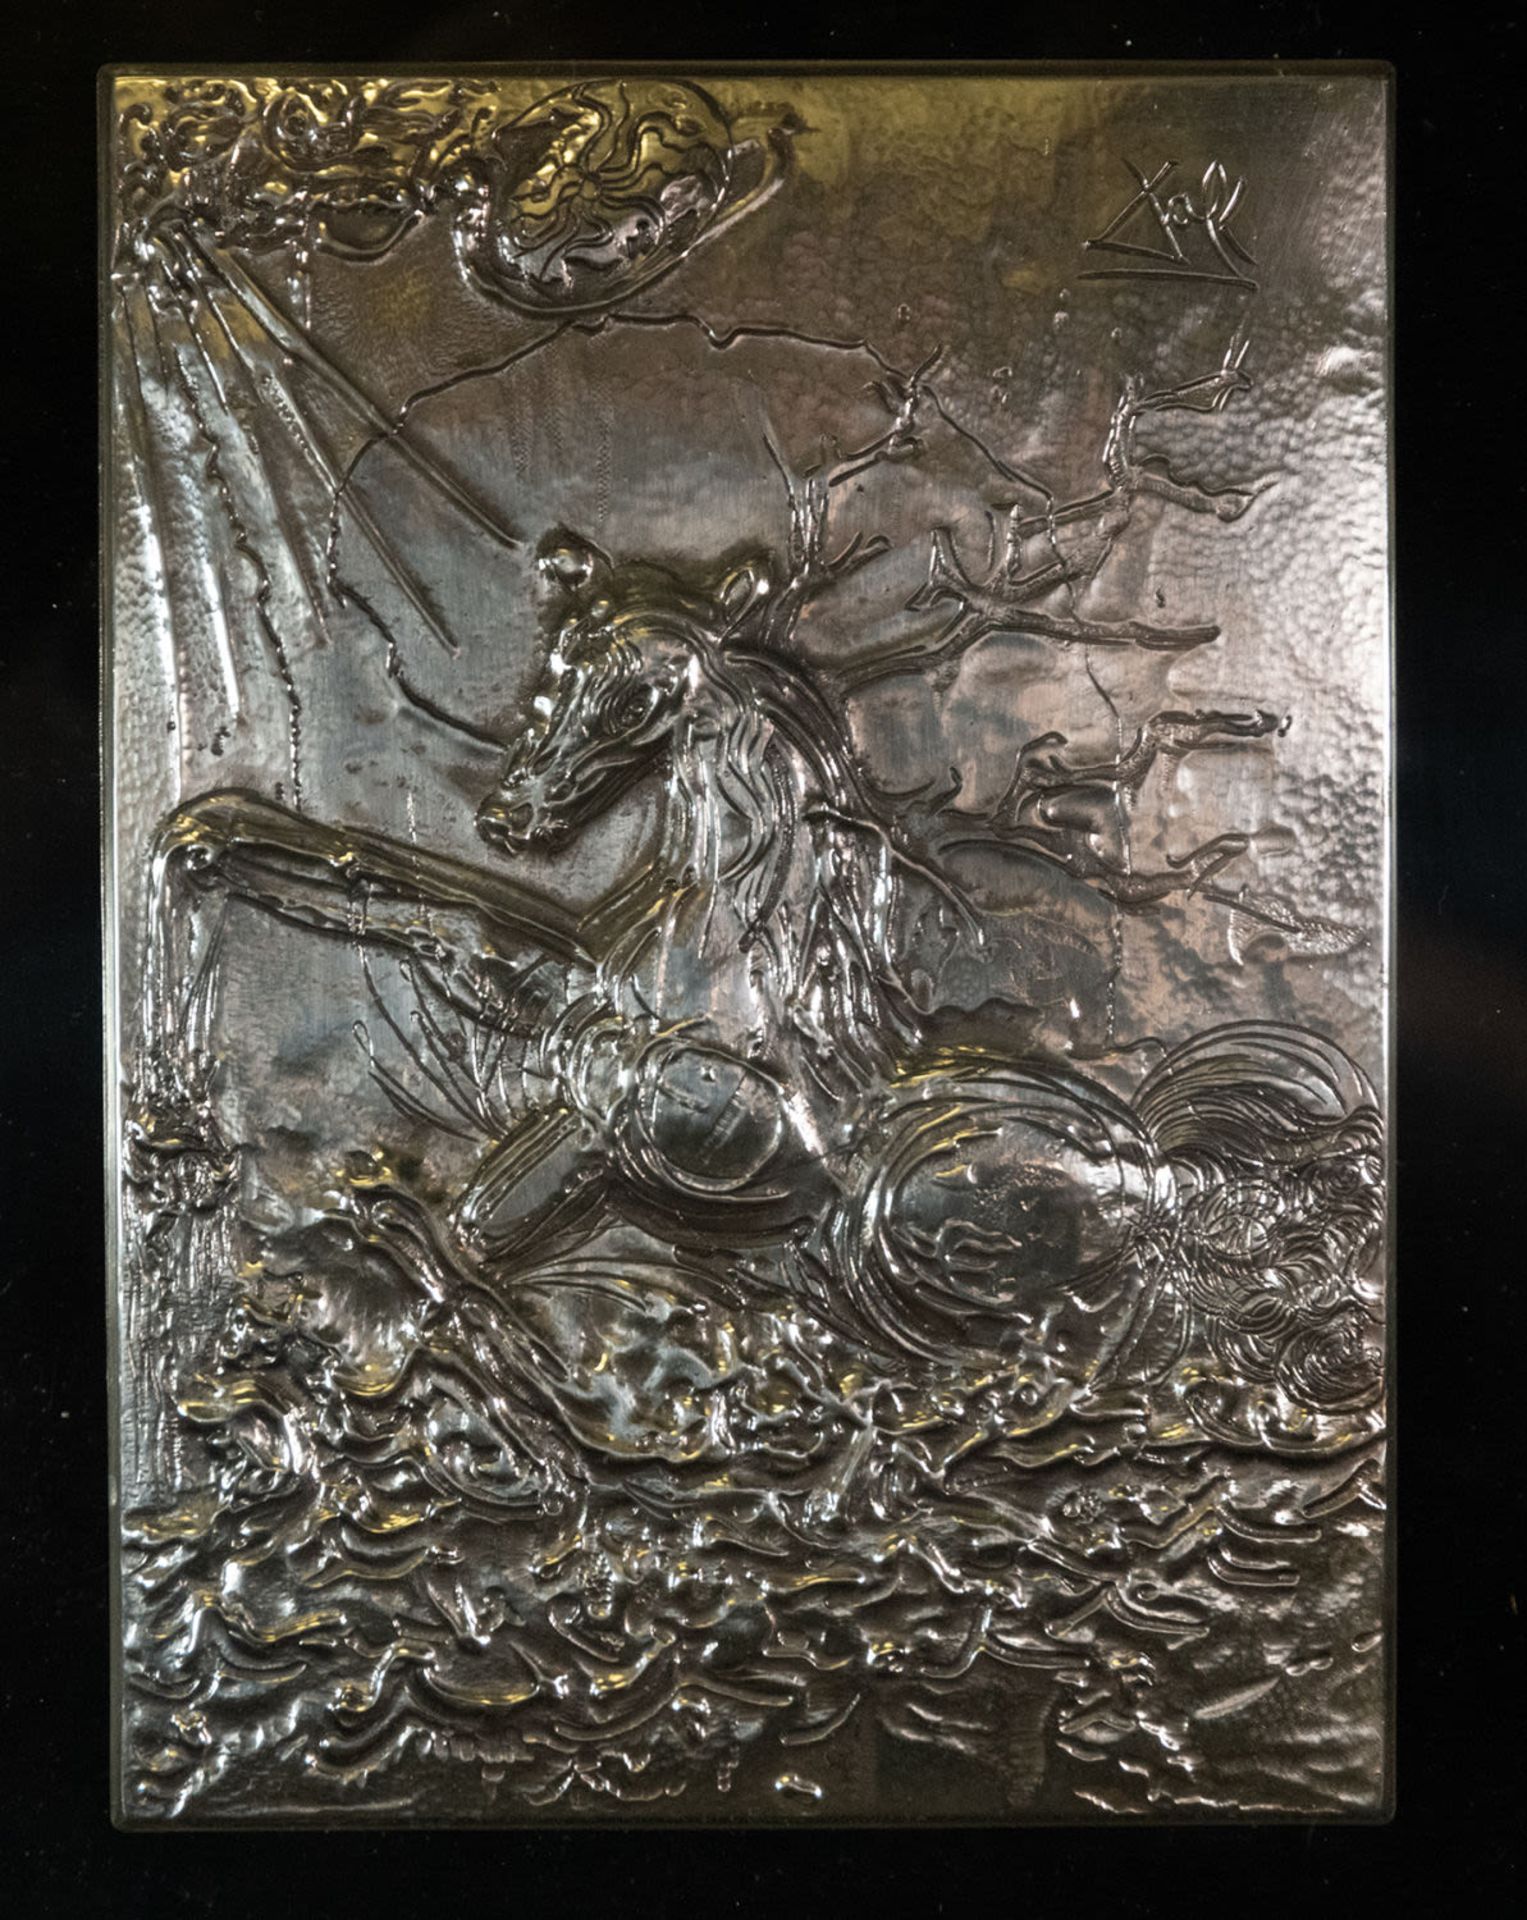 Dalí silver plate from the "Caballos Dalinianos" Series, numbered and serialized - Image 2 of 4